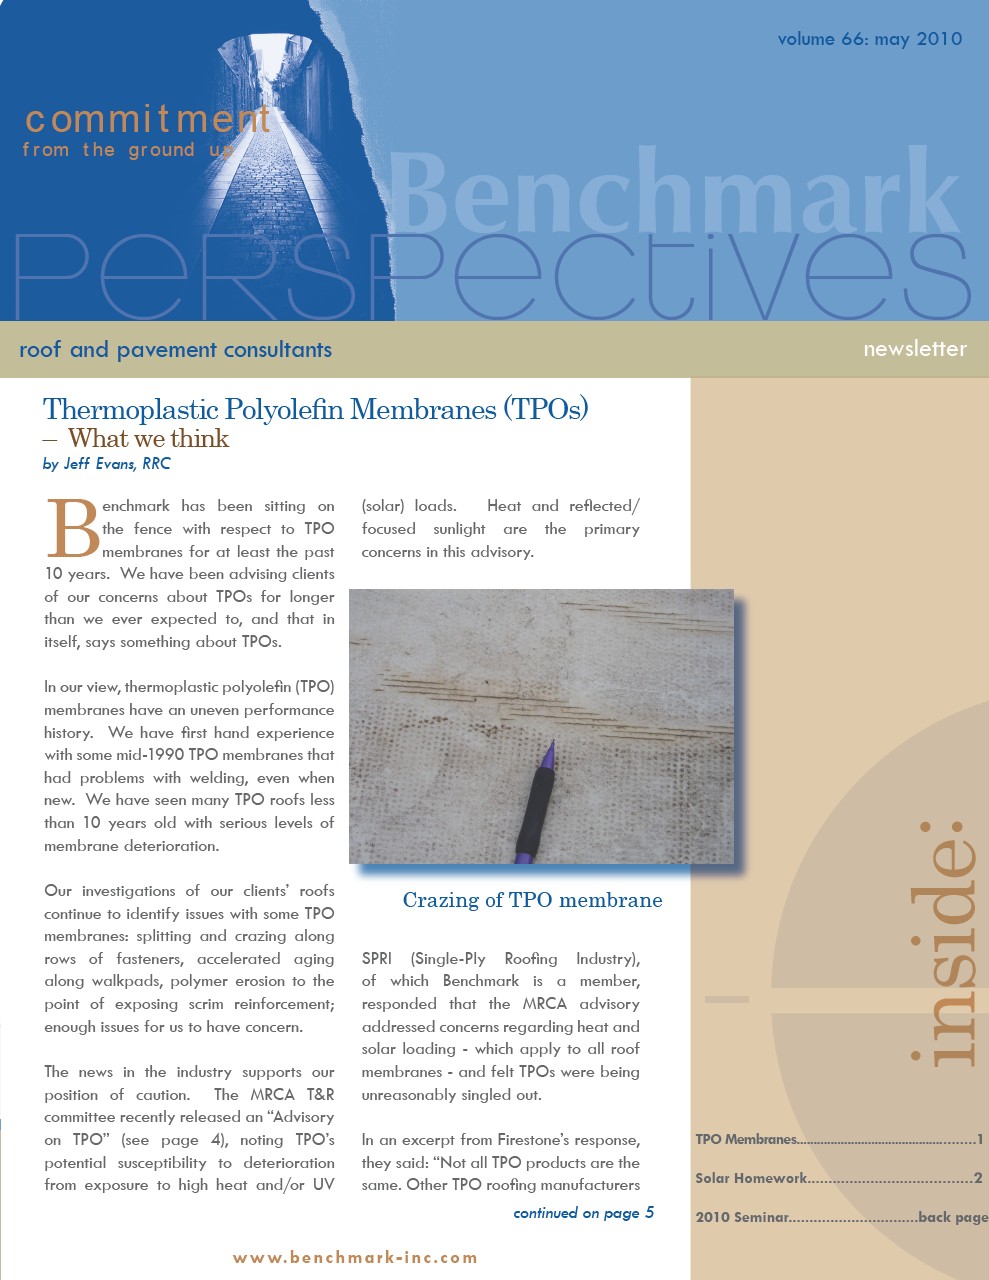 Research Report - Benchmark Perspectives On TPO Membranes 